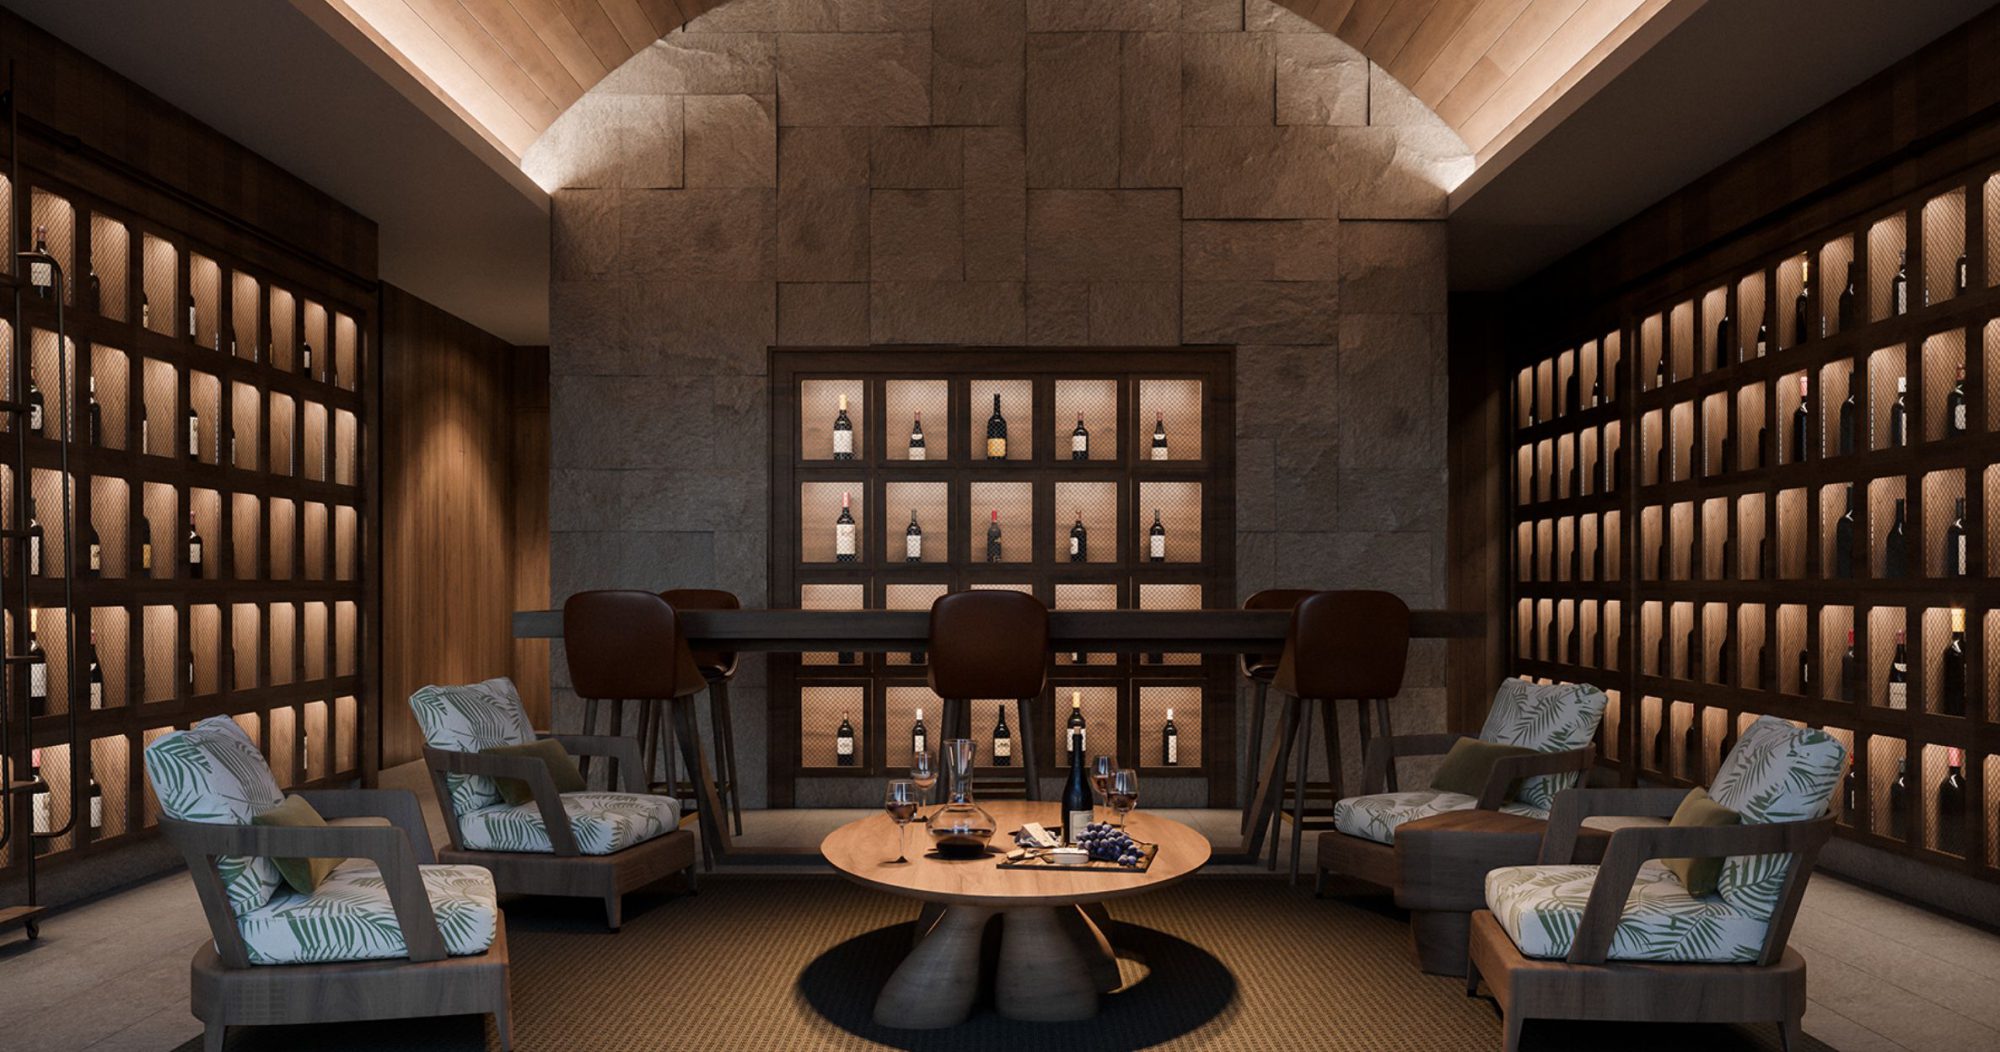 Wine room with lounge seating and bottle displayed on the walls